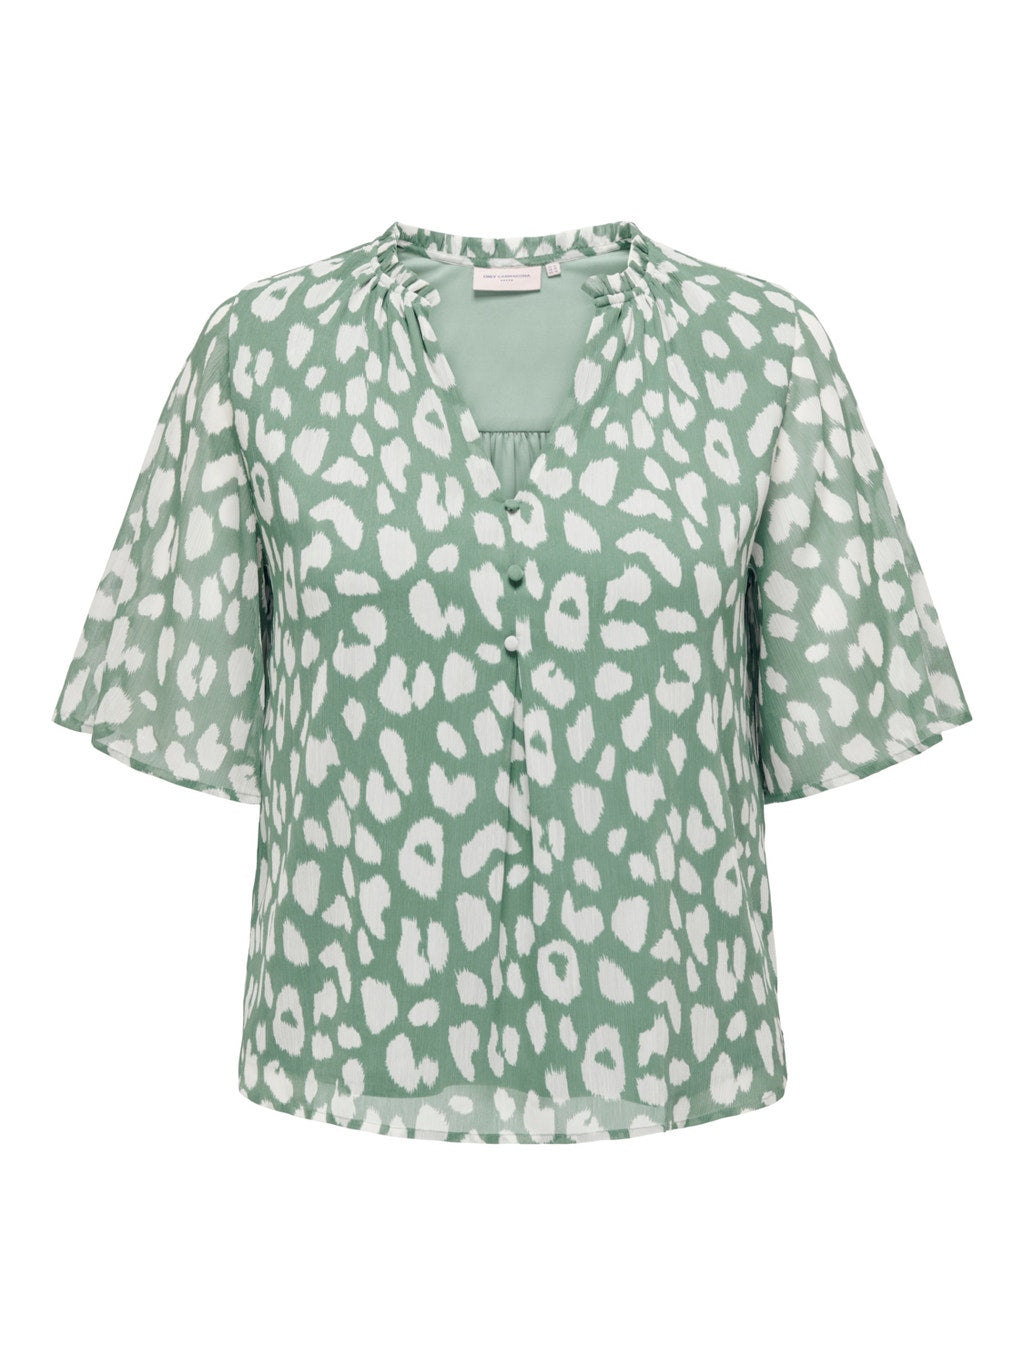 Only Carmakoma Victoria Blouse in Green - Wardrobe Plus